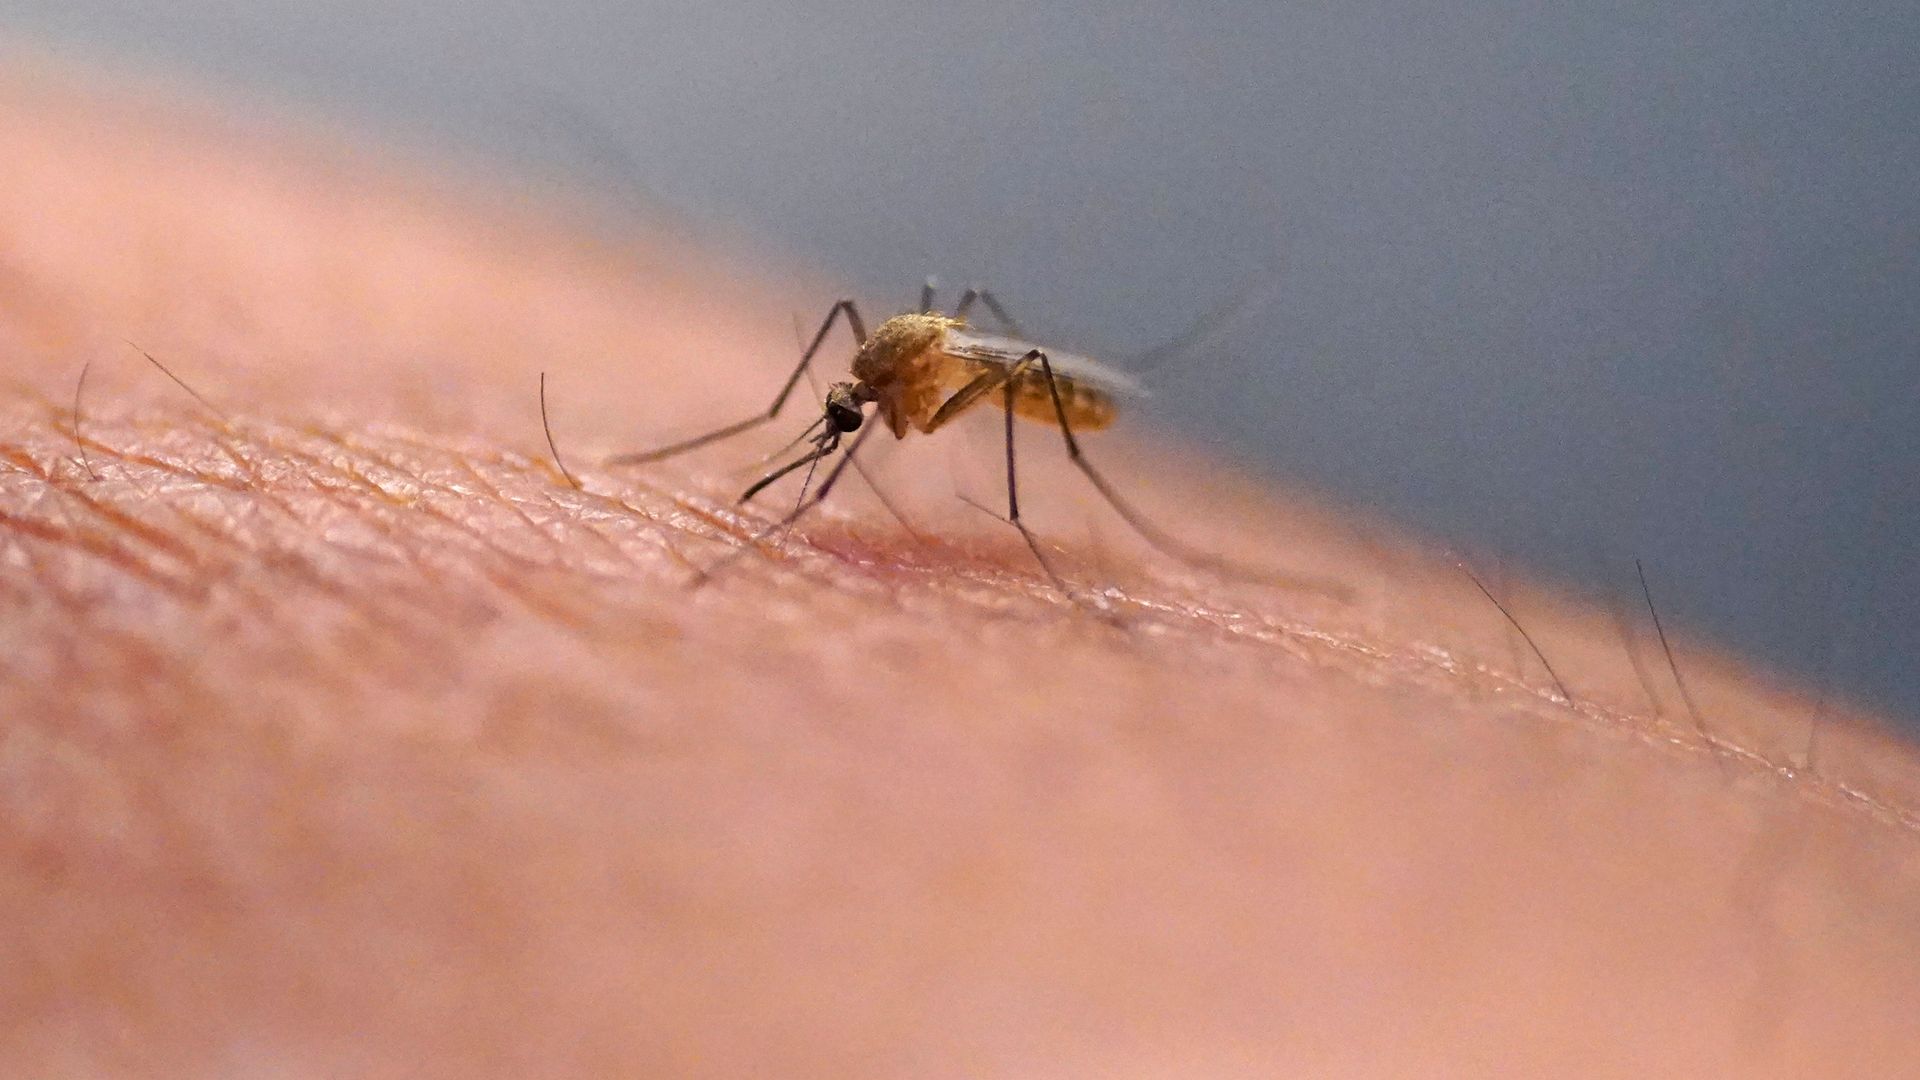 Over half of world's population could be at risk of mosquito-borne diseases, experts warn